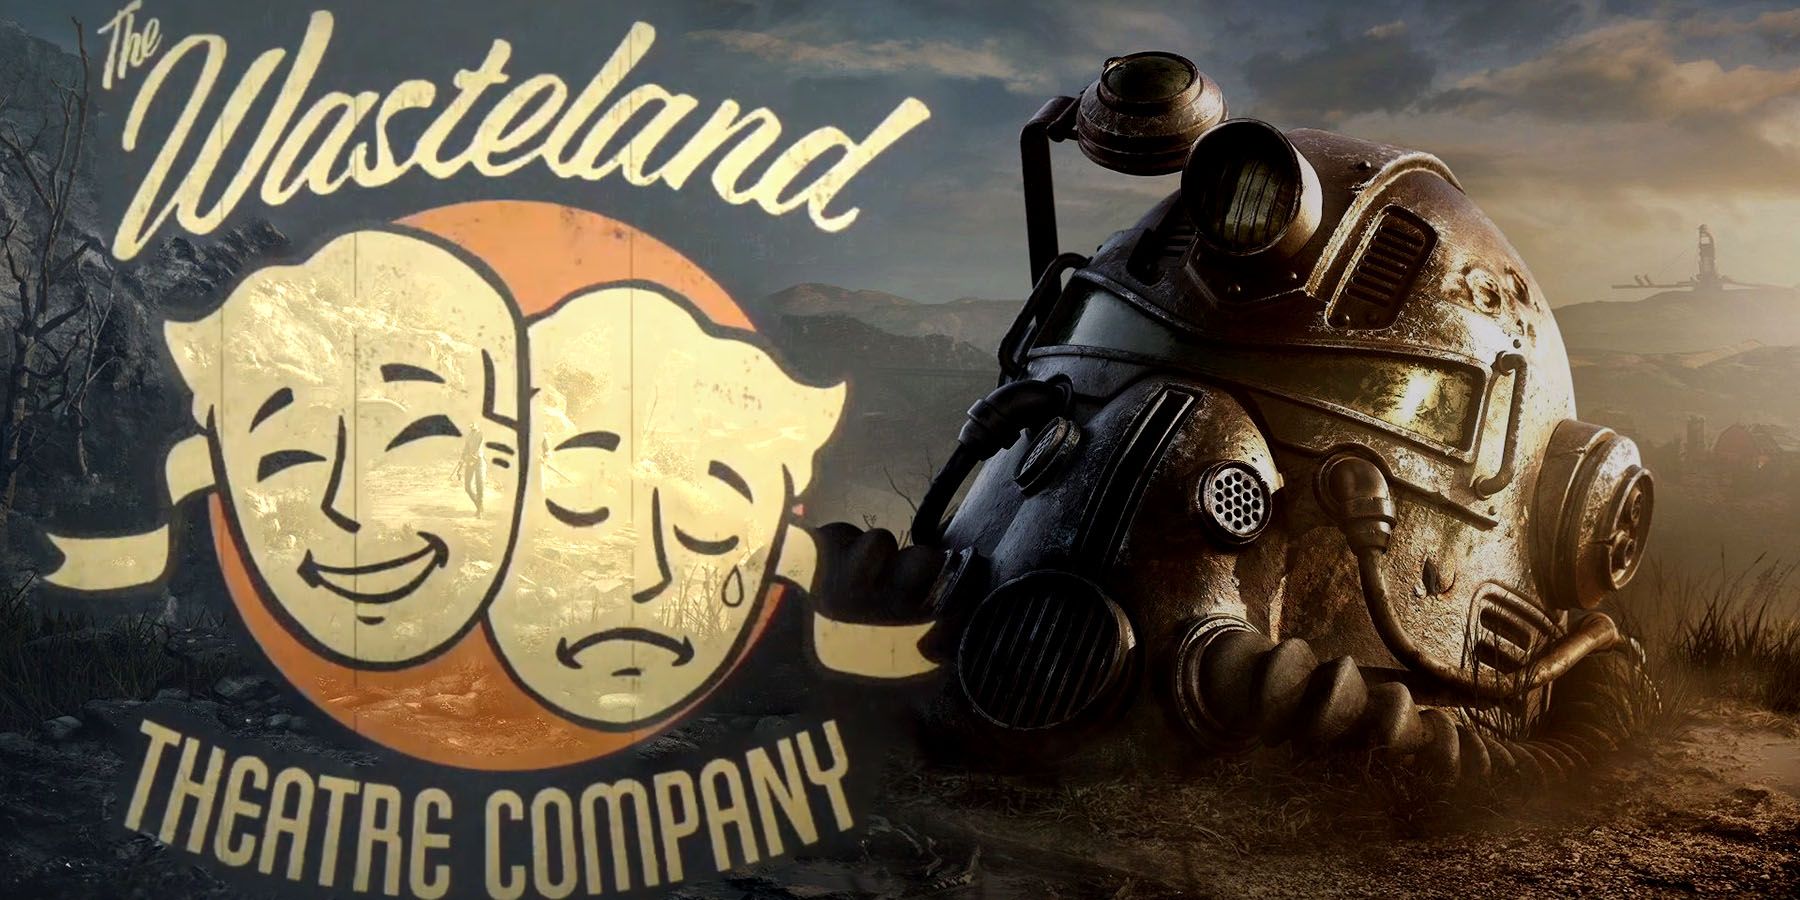 How Fallout 76's Wasteland Theatre Company Grew out of the Pandemic